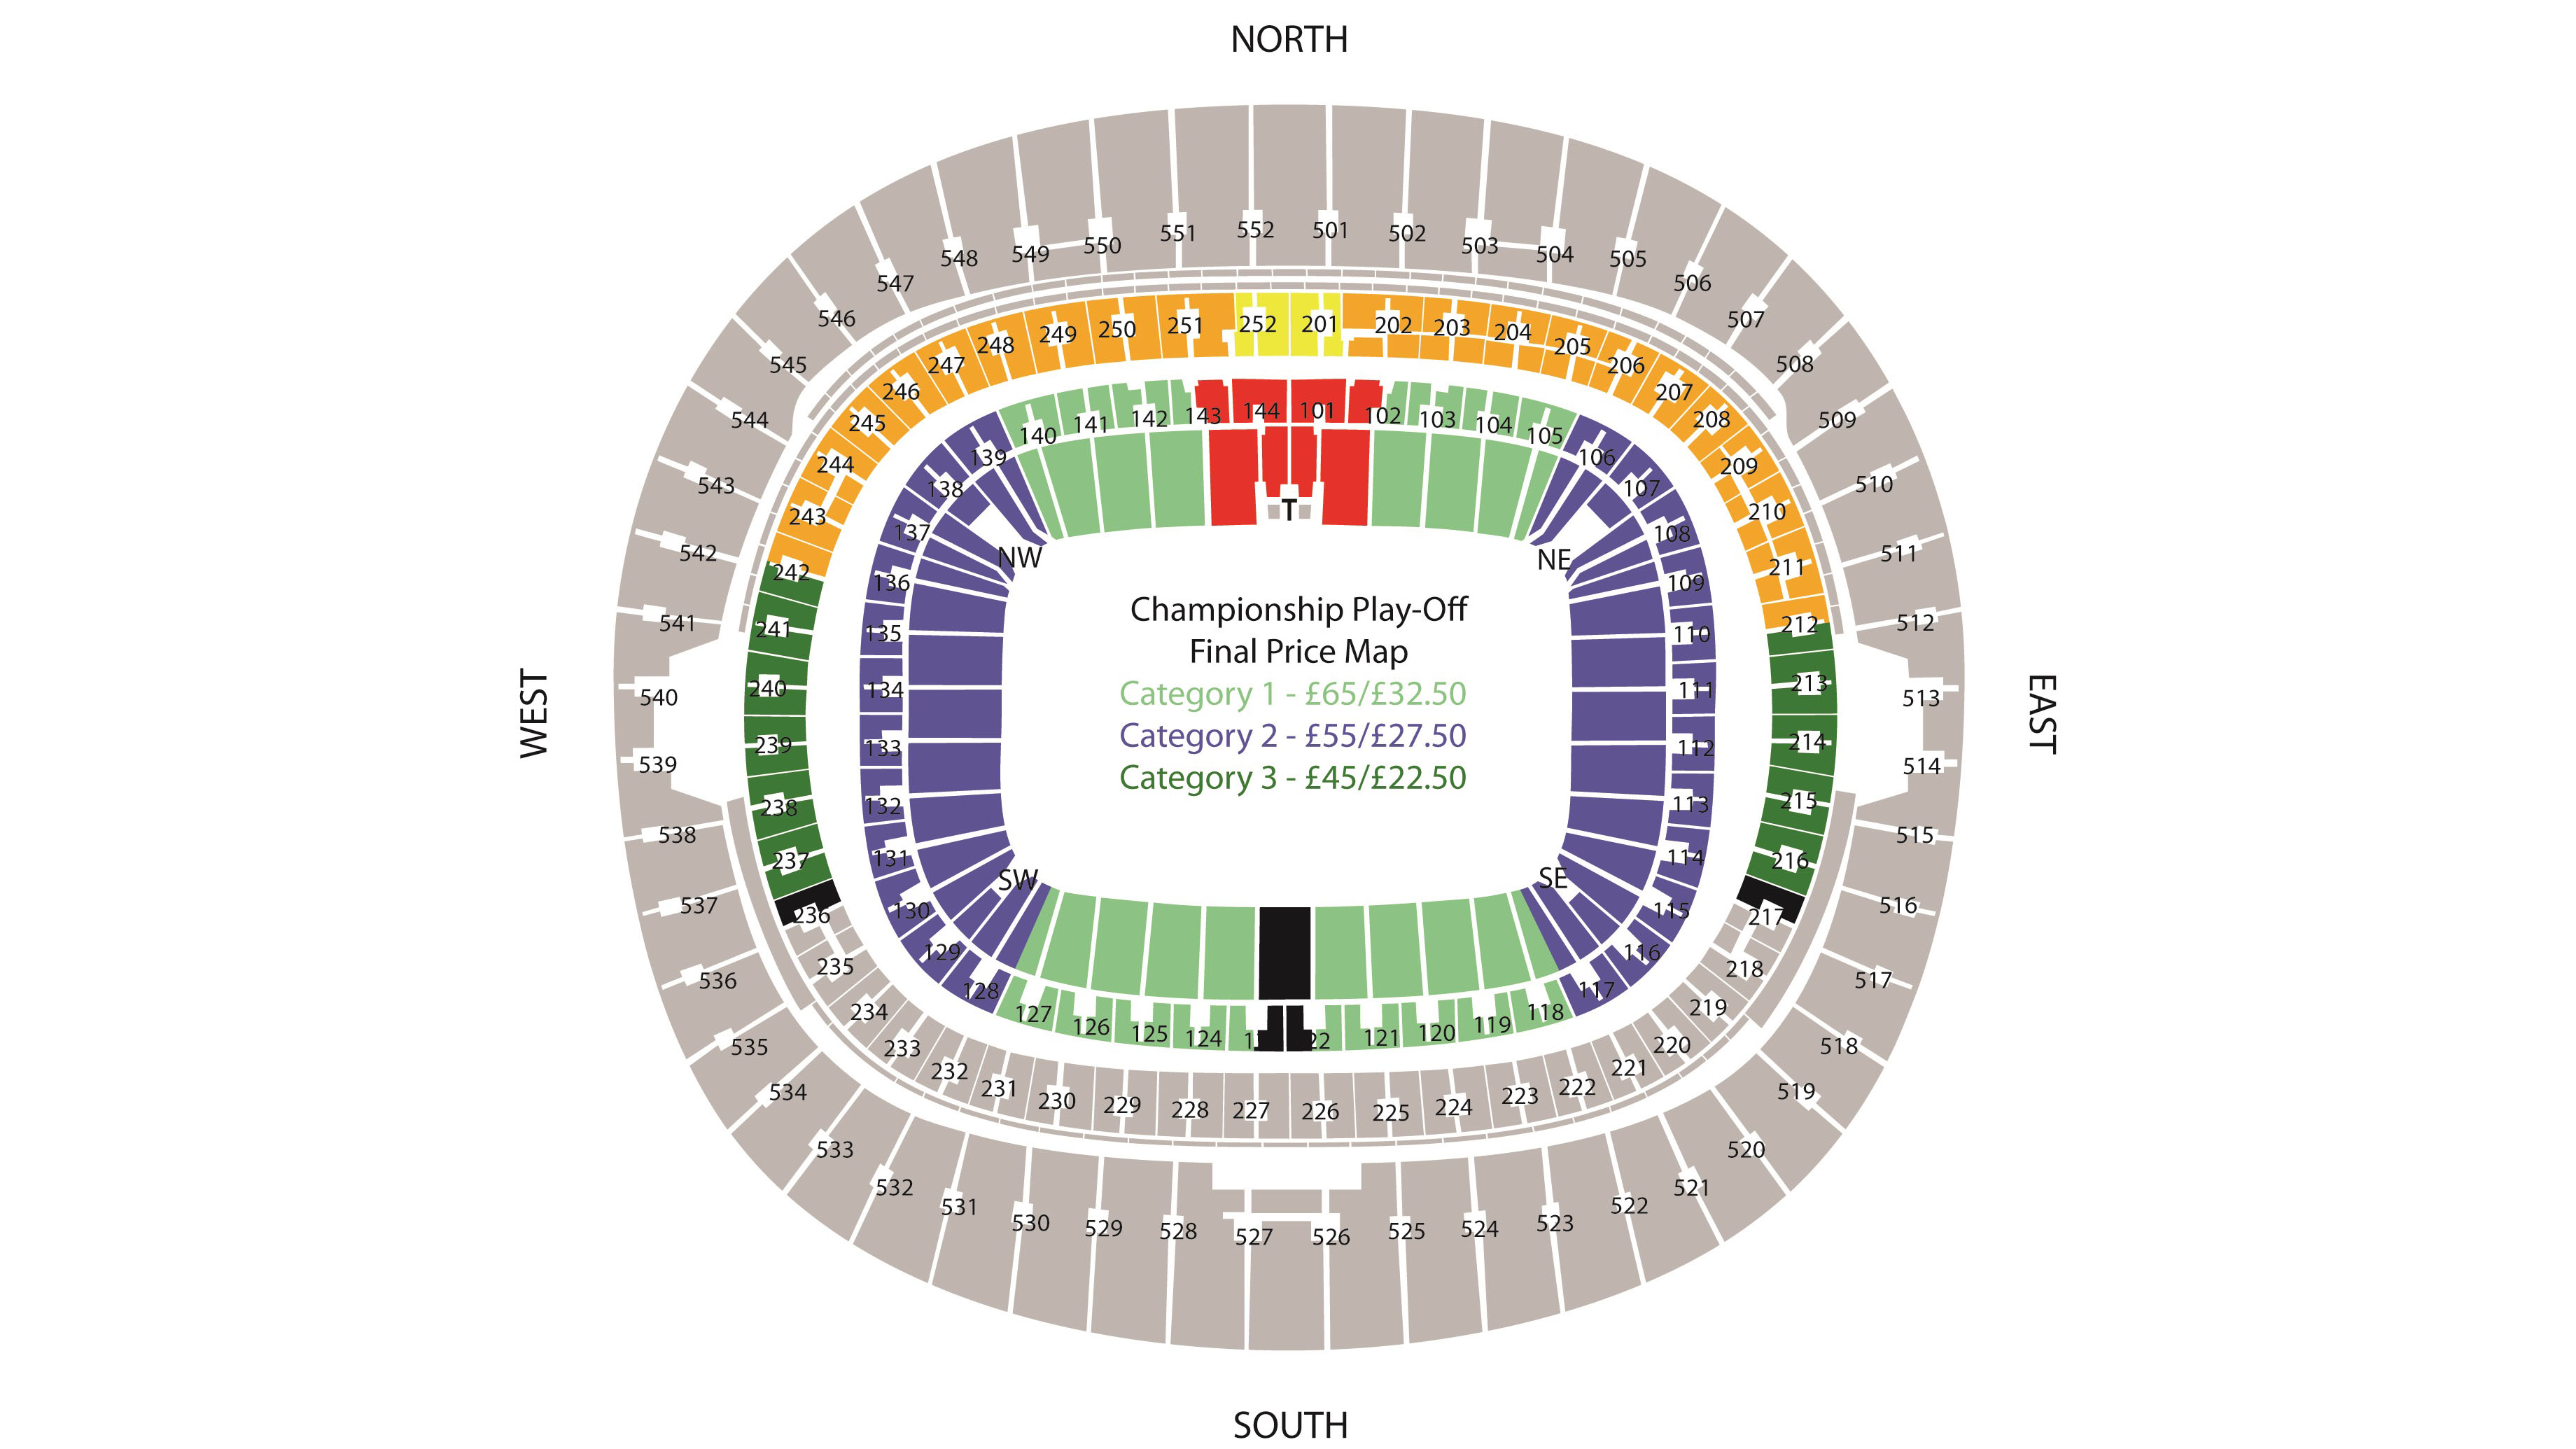 Play-off final price map